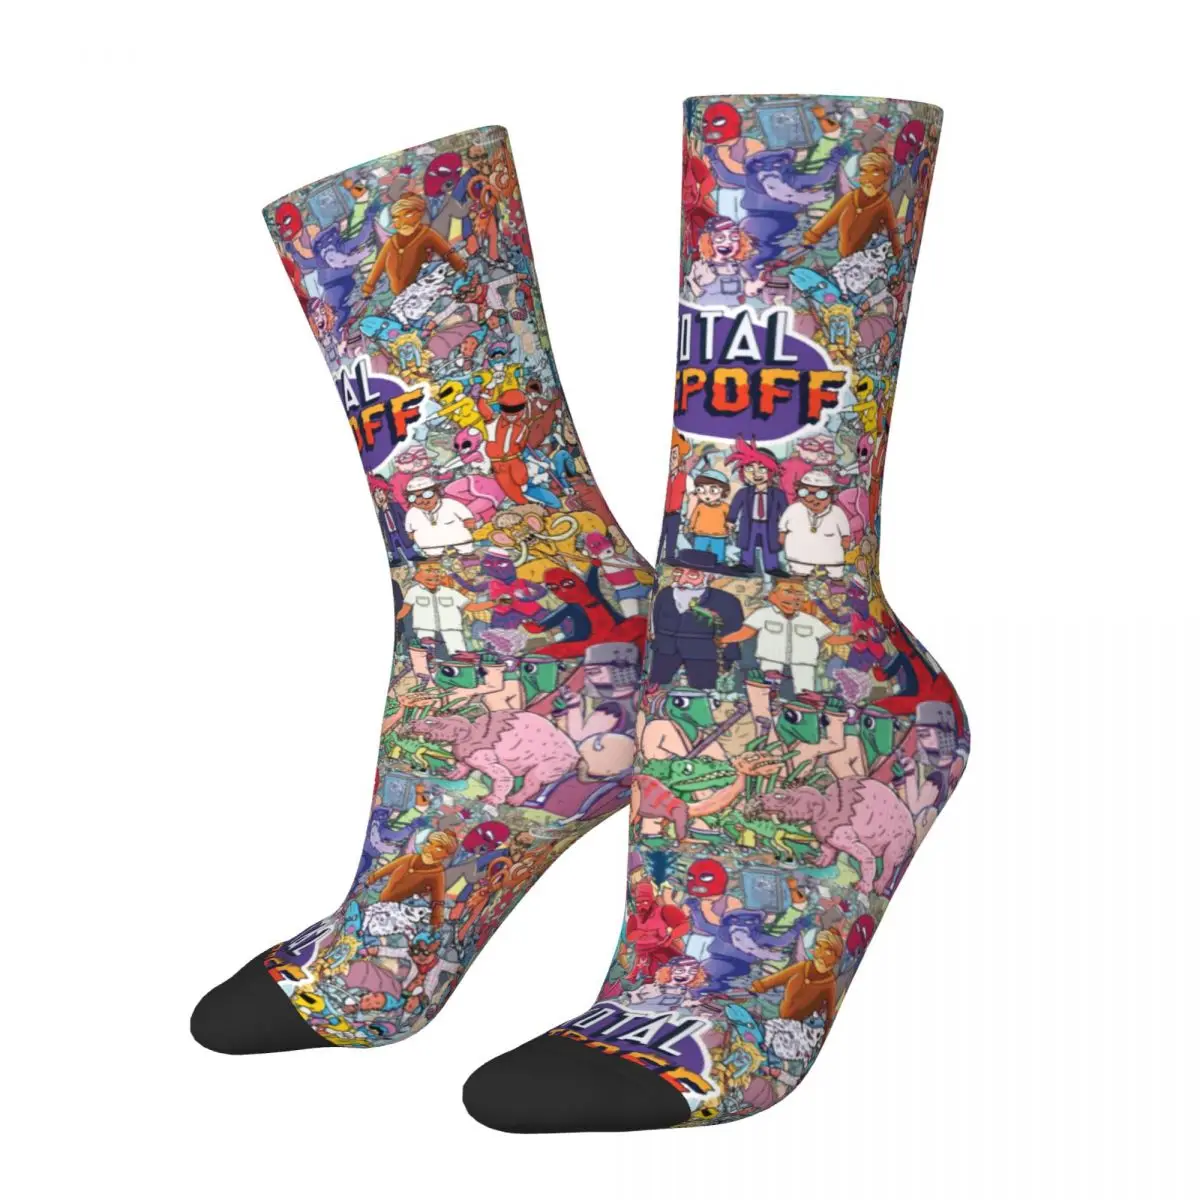 

Unisex Retro Totally Total Ripoff Socks Soft Fashion Many People Socks High Quality Product Middle TubeSocks Best Gift Idea